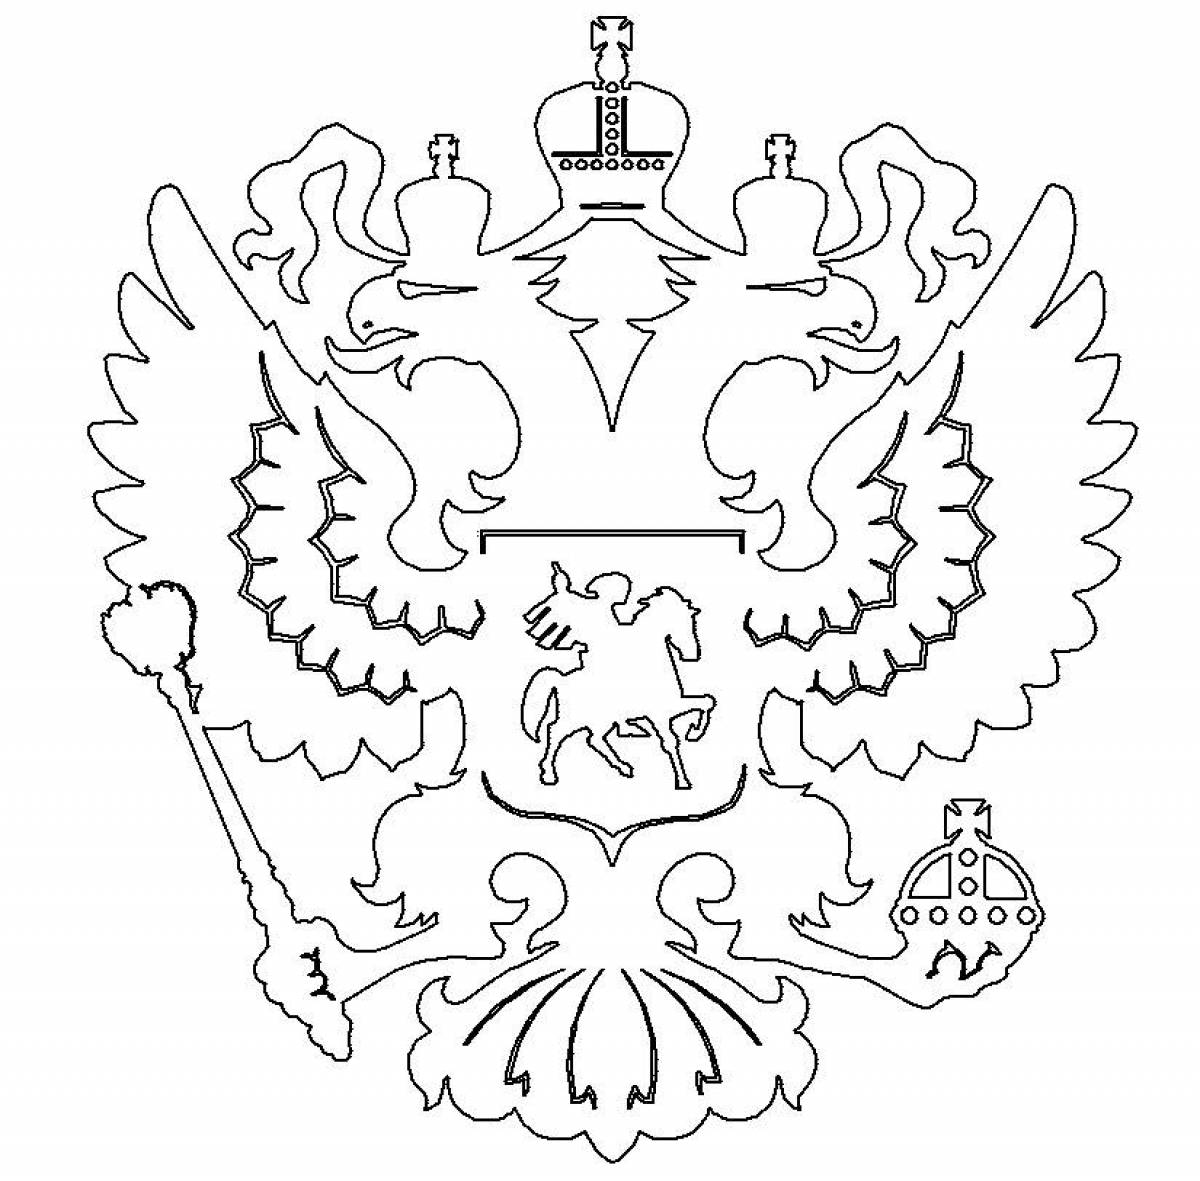 Brilliant coloring coat of arms of russia